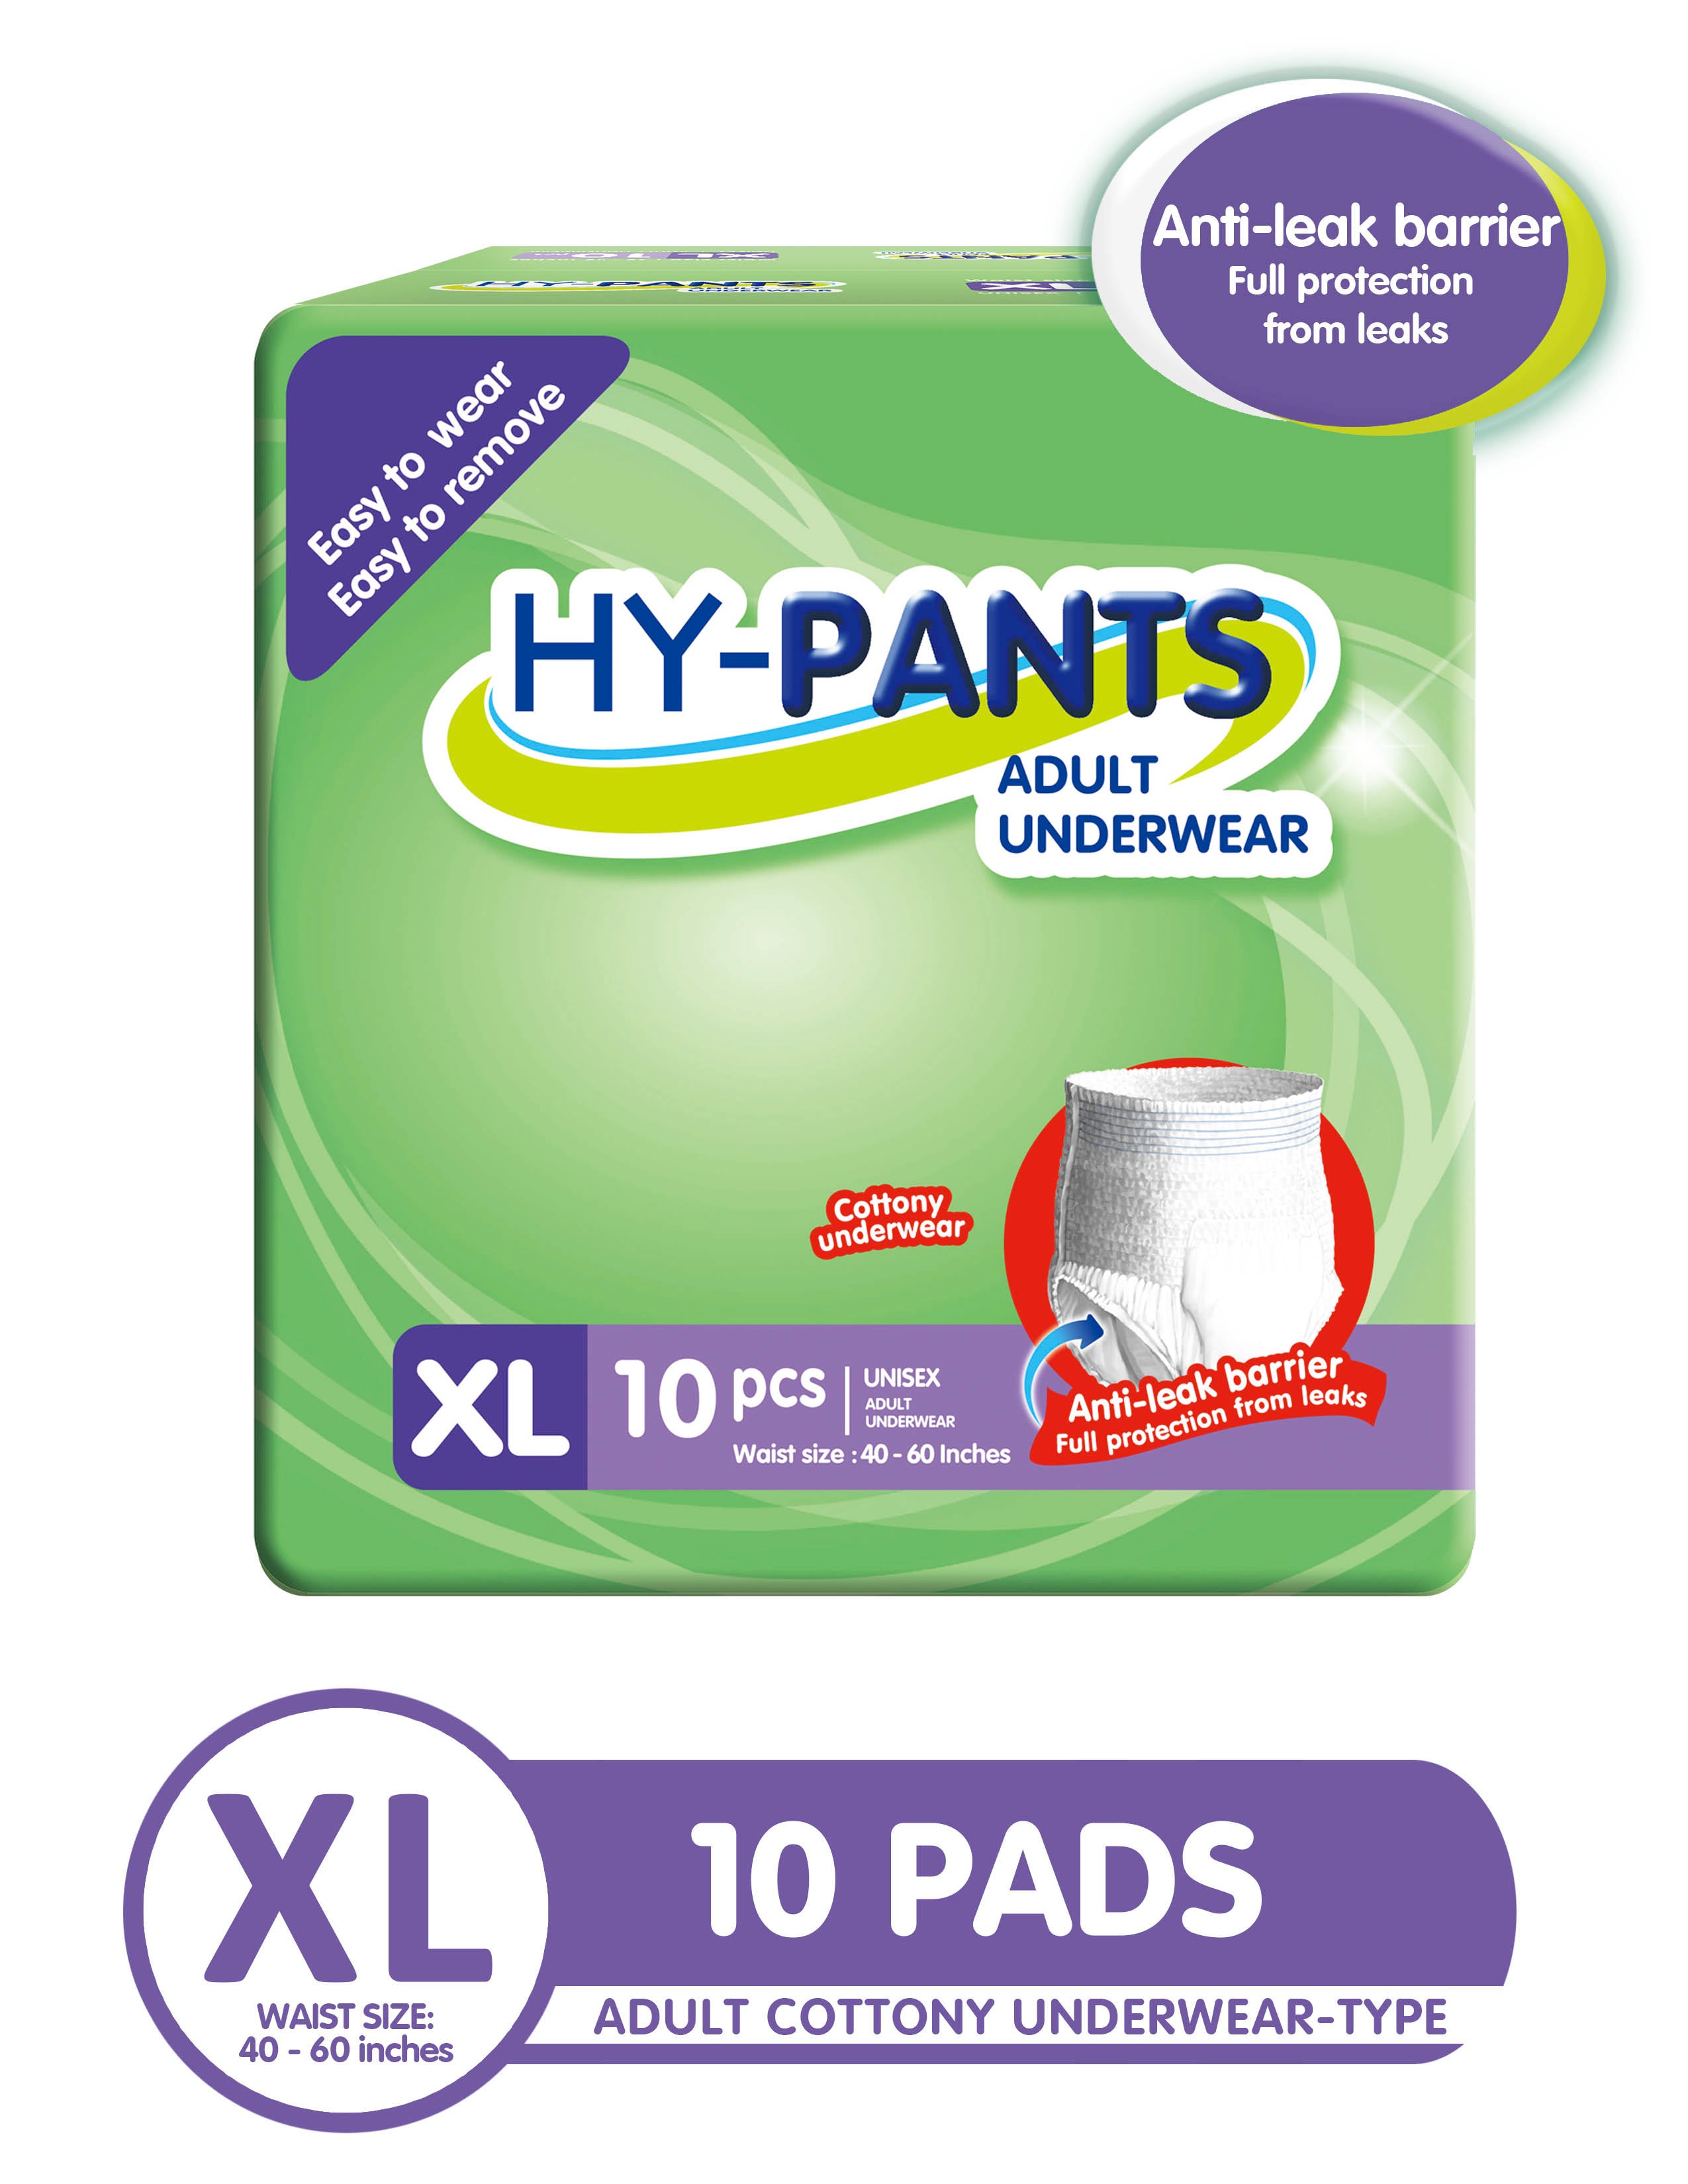 Hy-pants Adult Underwear Extra Large - 1 Pack of 10 Pads